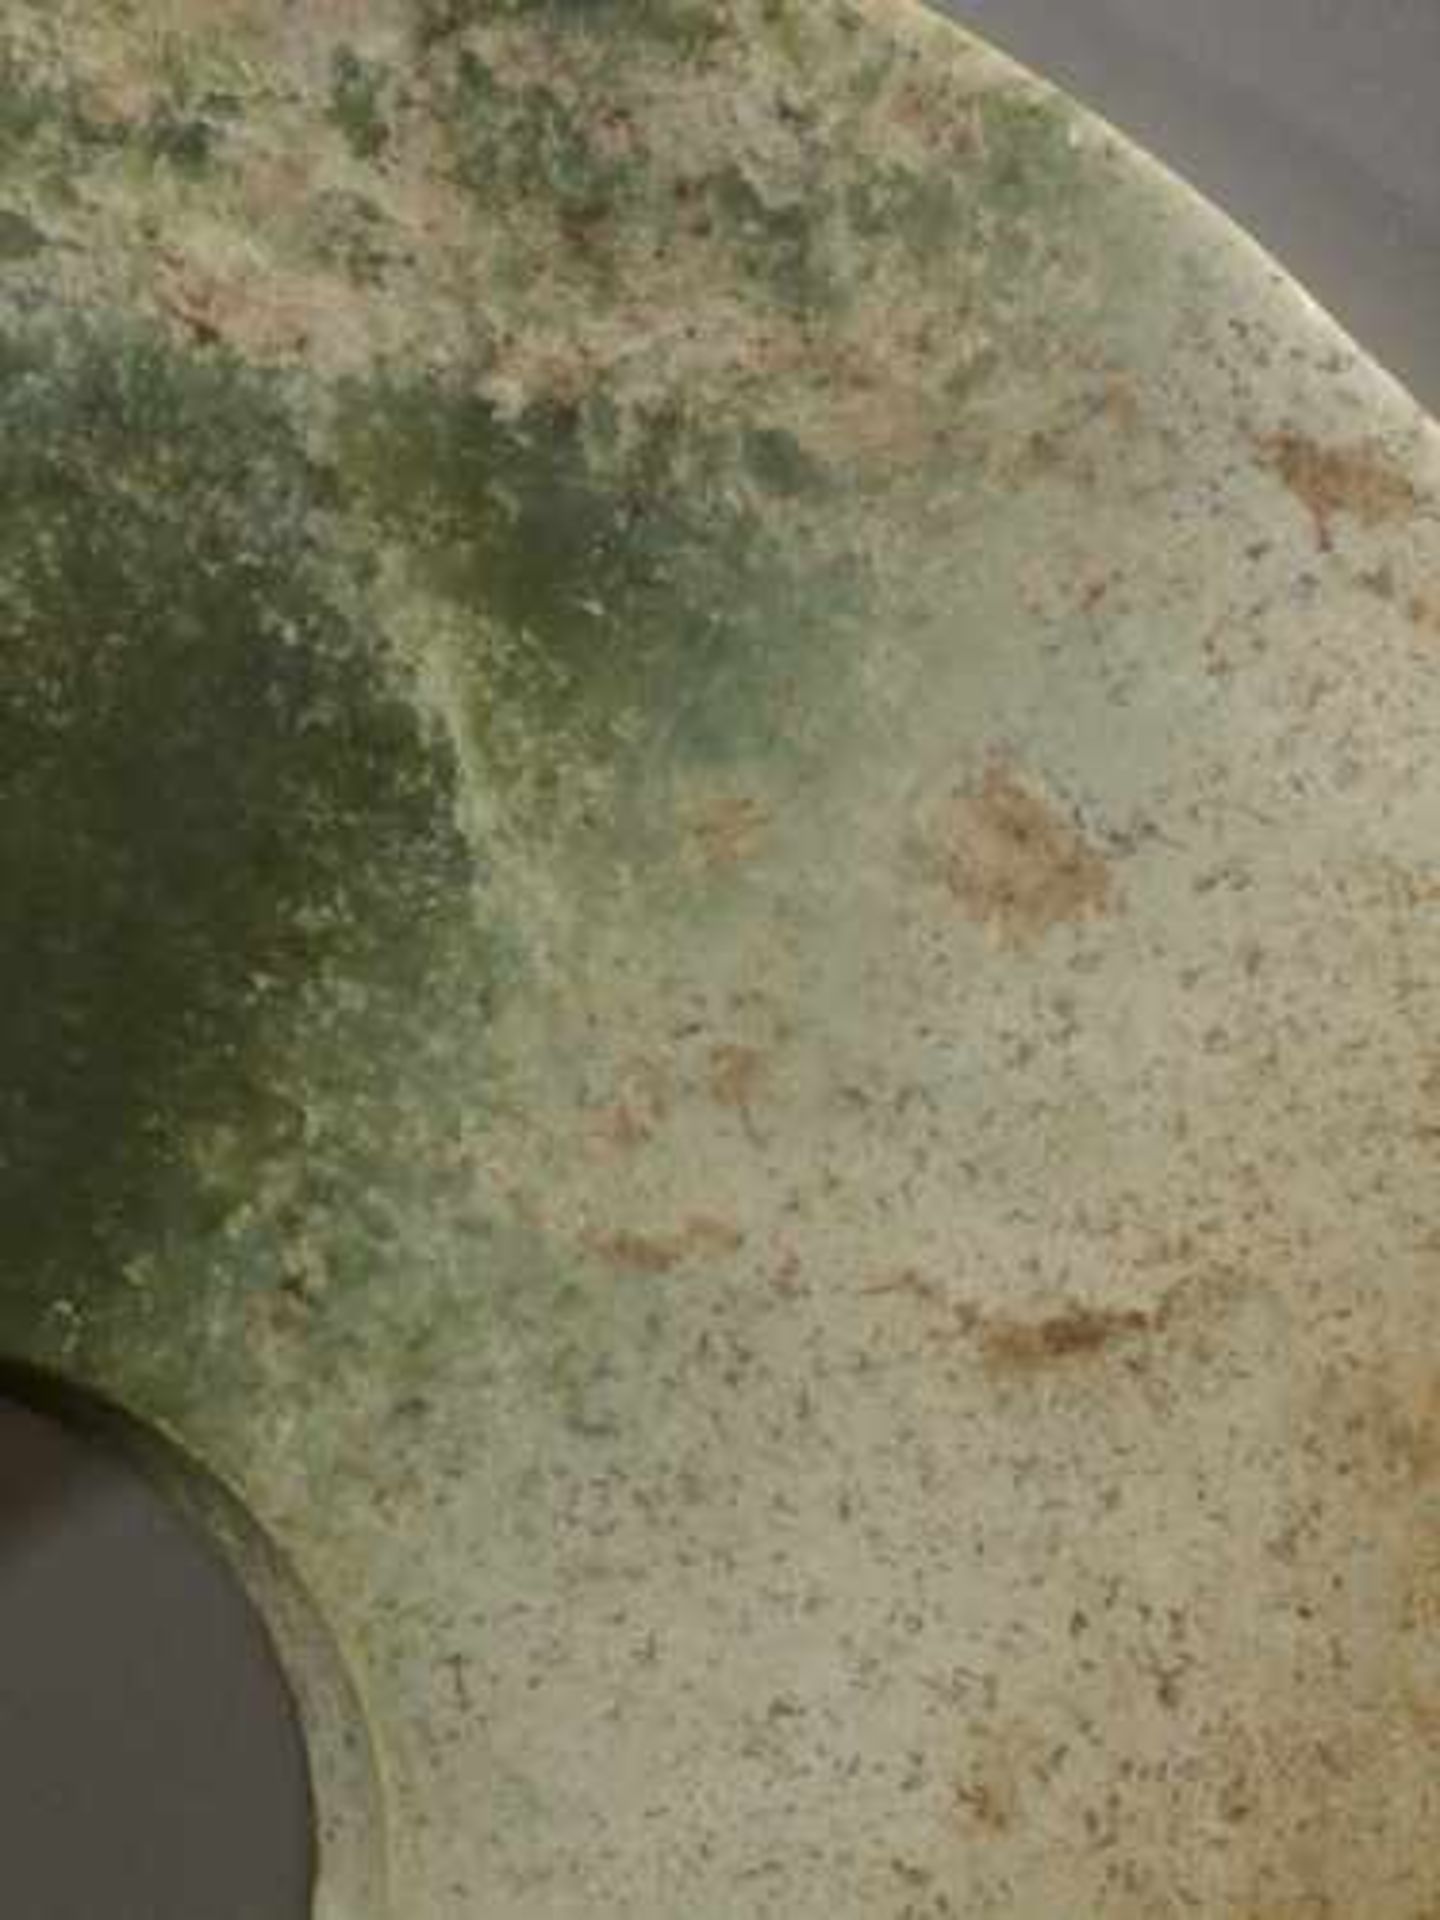 A LARGE SMOOTH BI DISC IN GREEN JADE WITH WHITENED AREAS Jade, China. Early Bronze Age, c. 2200-1600 - Image 5 of 7